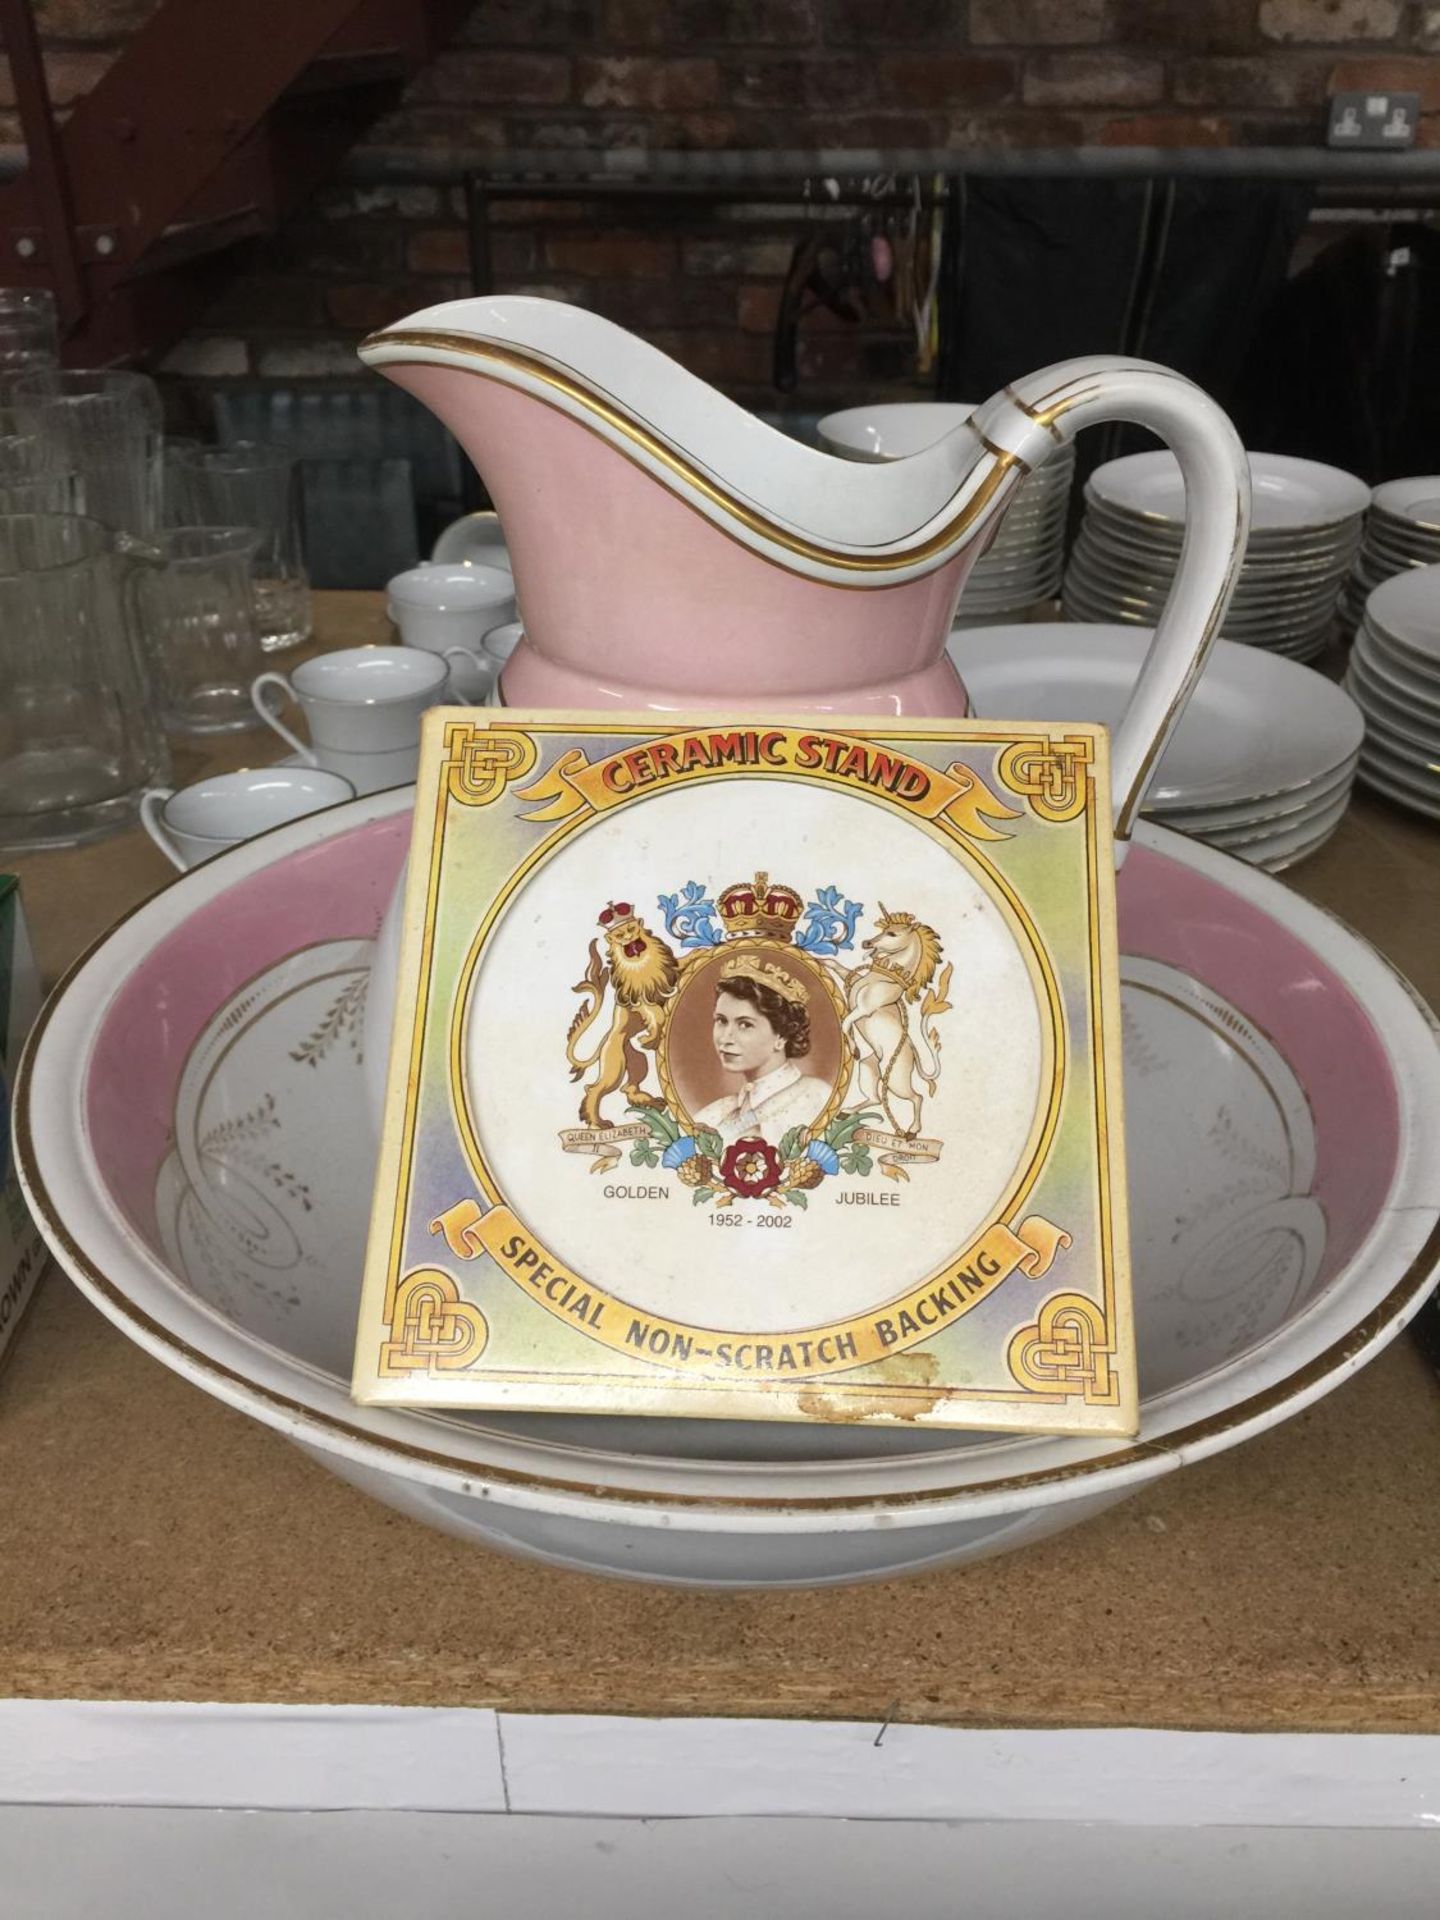 A LARGE WASHBOWL AND JUG - BOWL A/F PLUS A CERAMIC STAND COMMEMORATING THE QUEEN'S GOLDEN JUBILEE